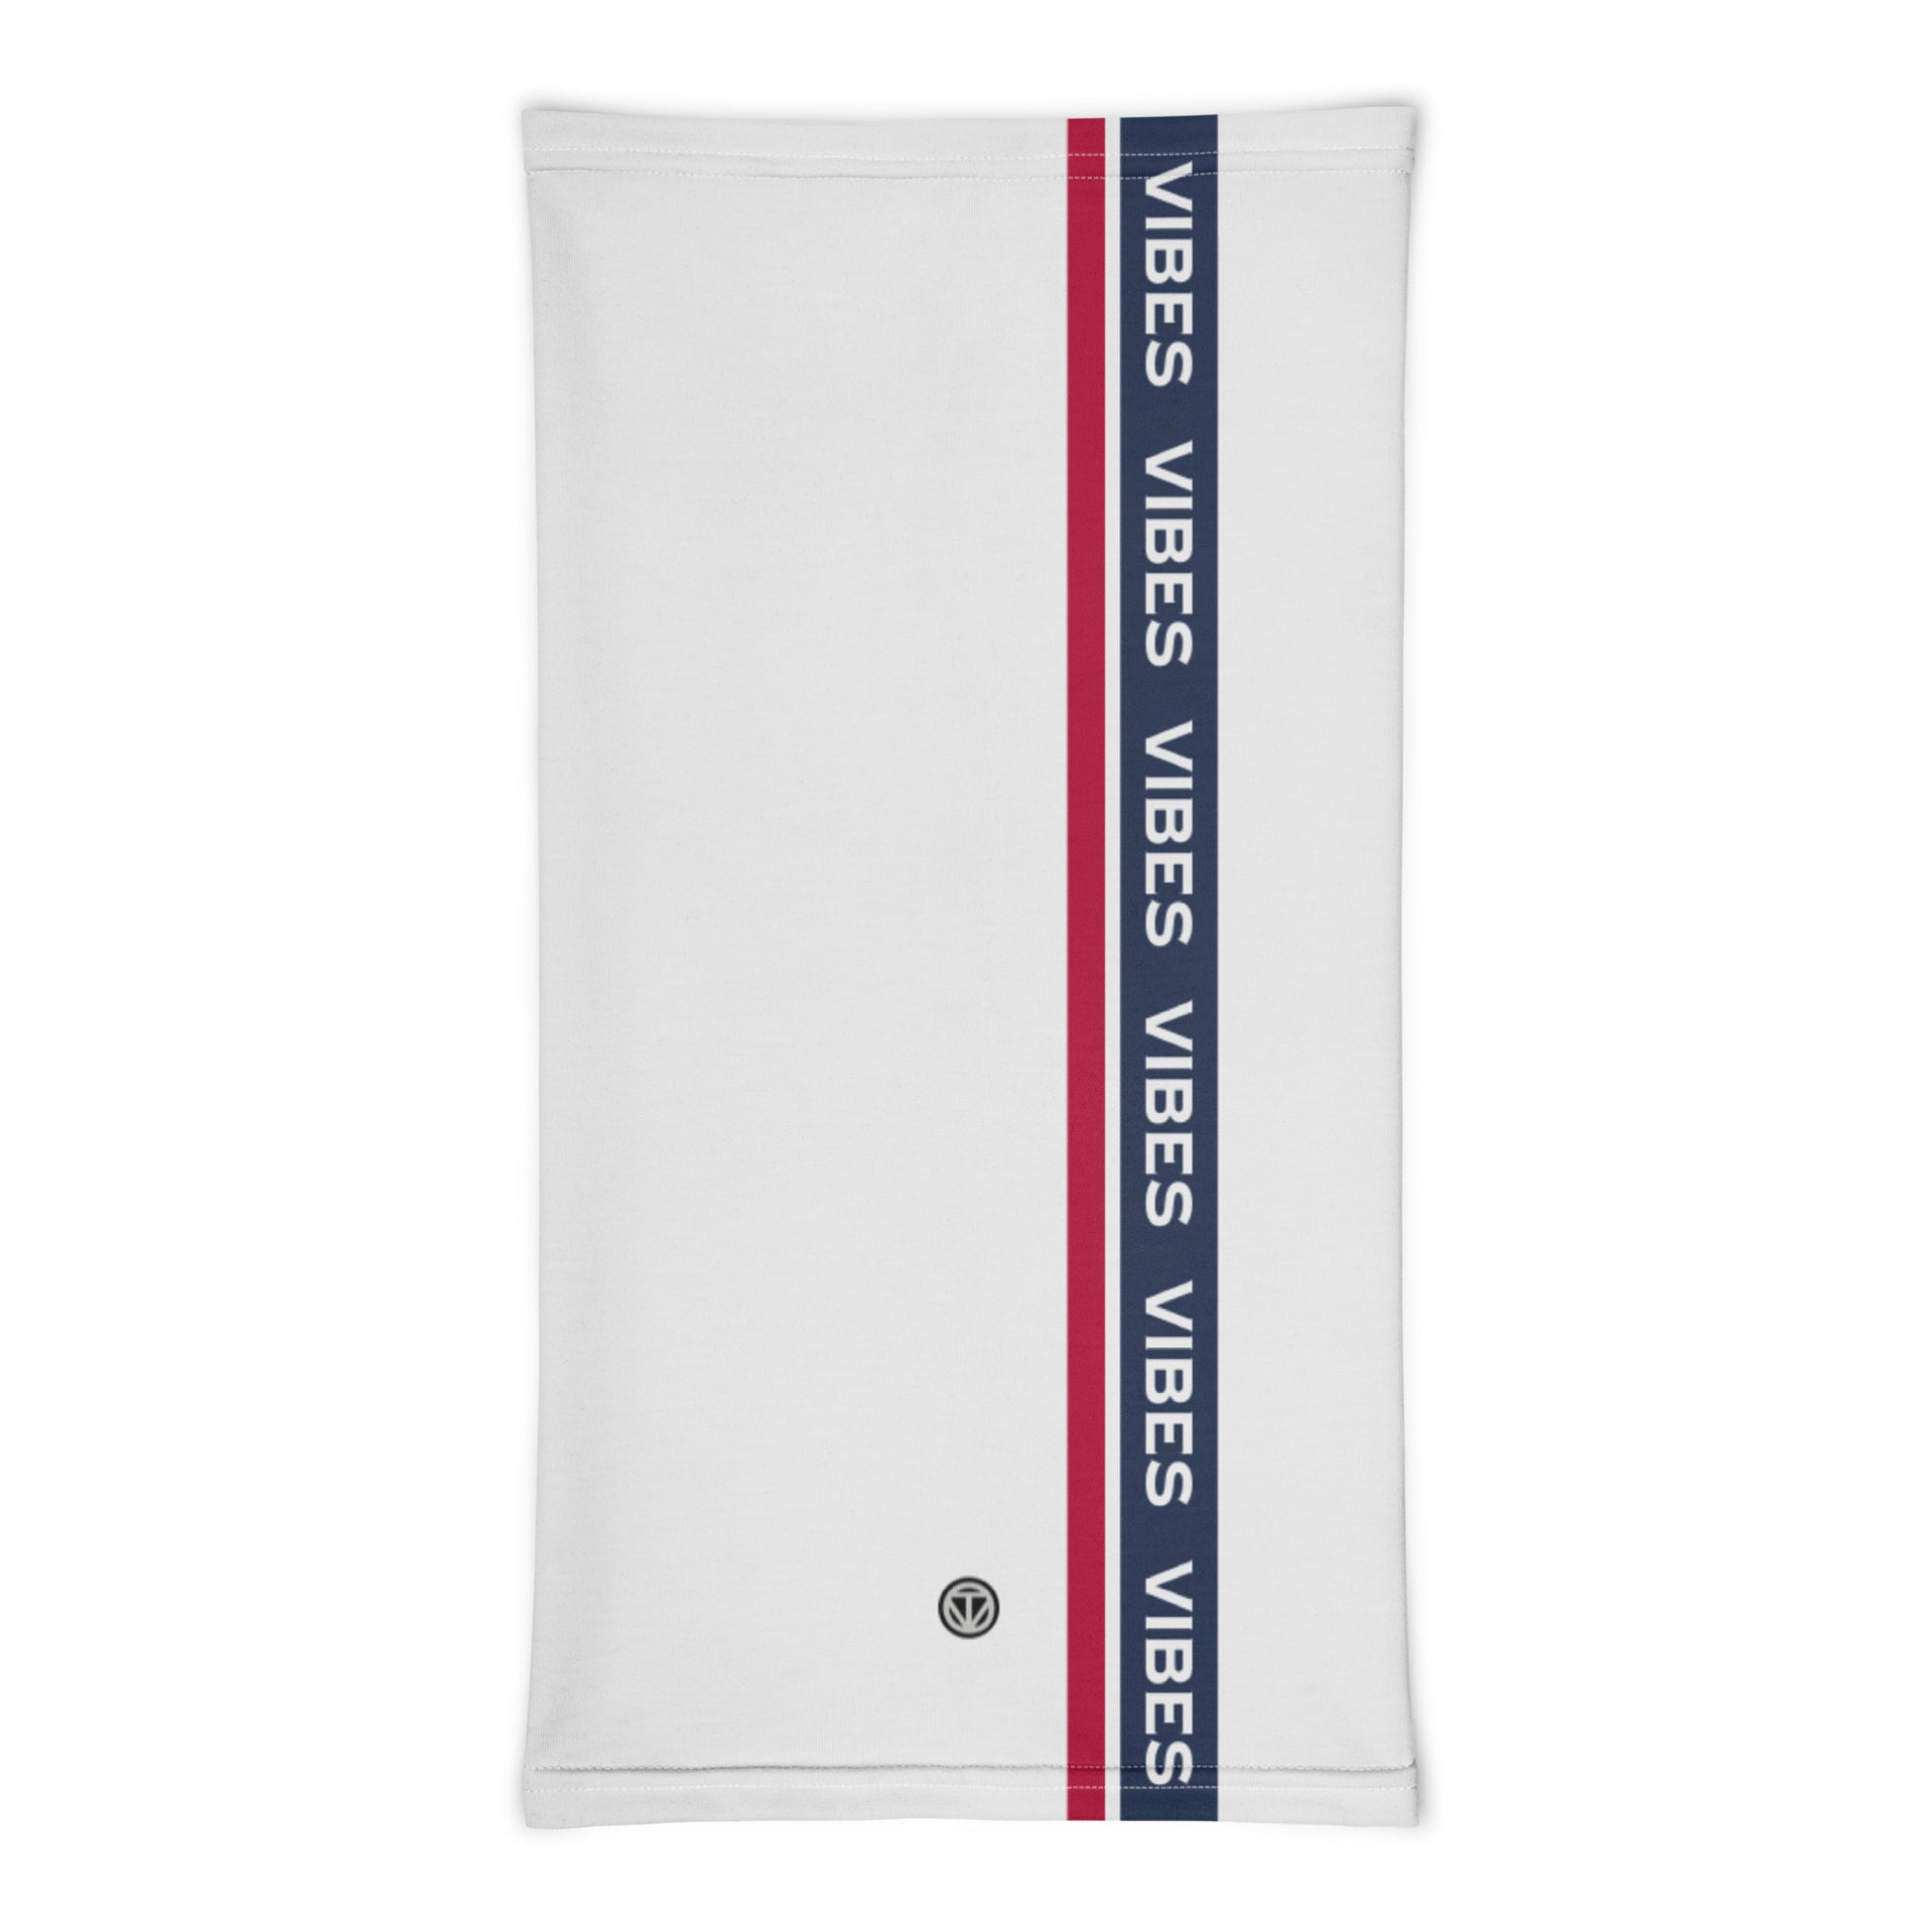 TIME OF VIBES - Bandana VIBES (Grey/Navy/Red) - €26.00